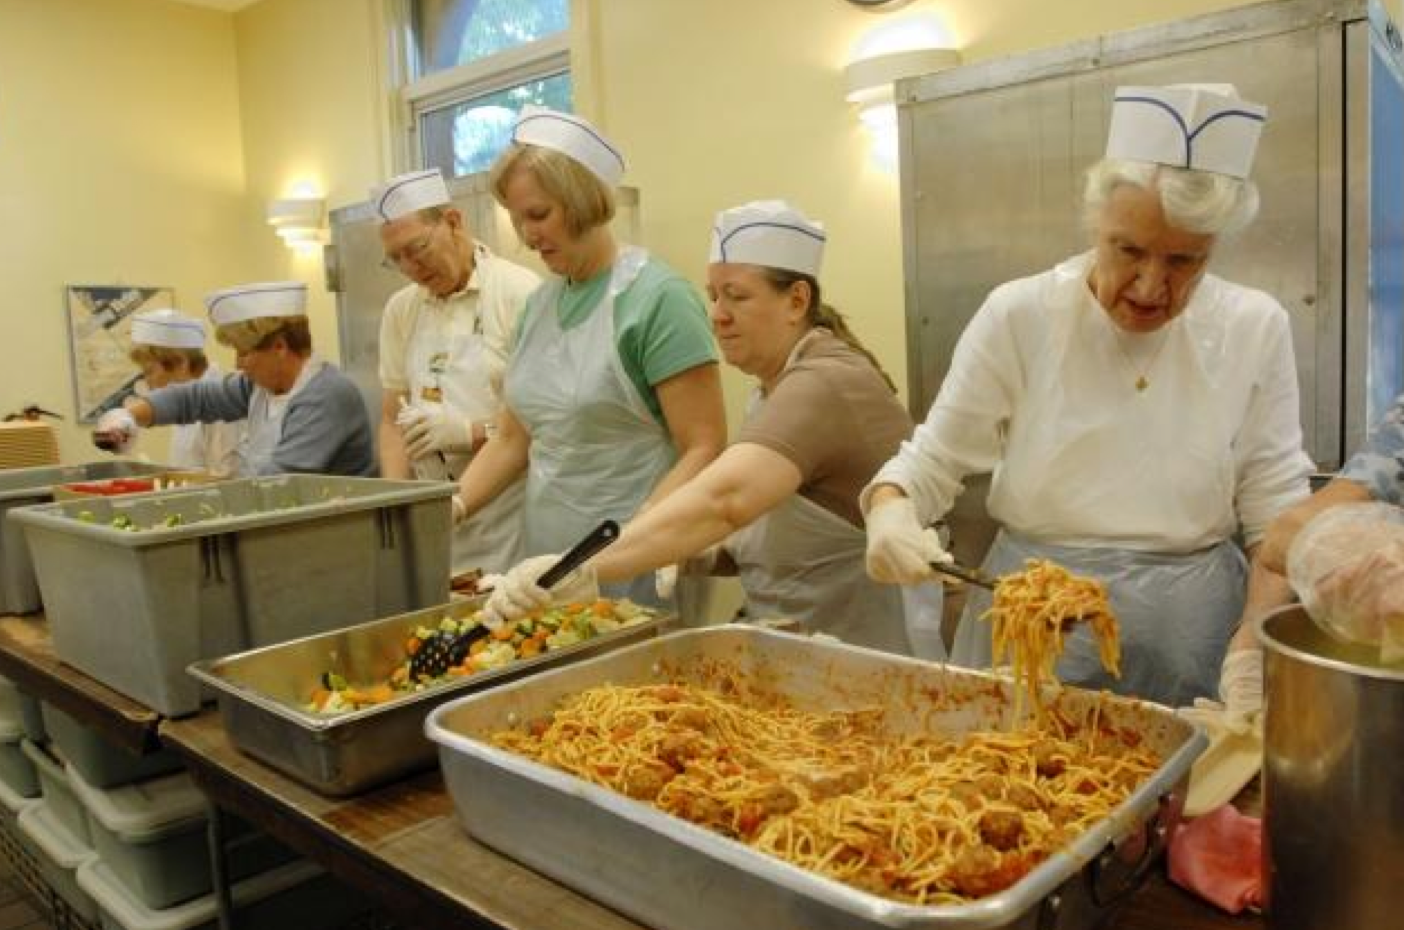 Soup Kitchens and food banks are running low on supplies to feed hungry Americans